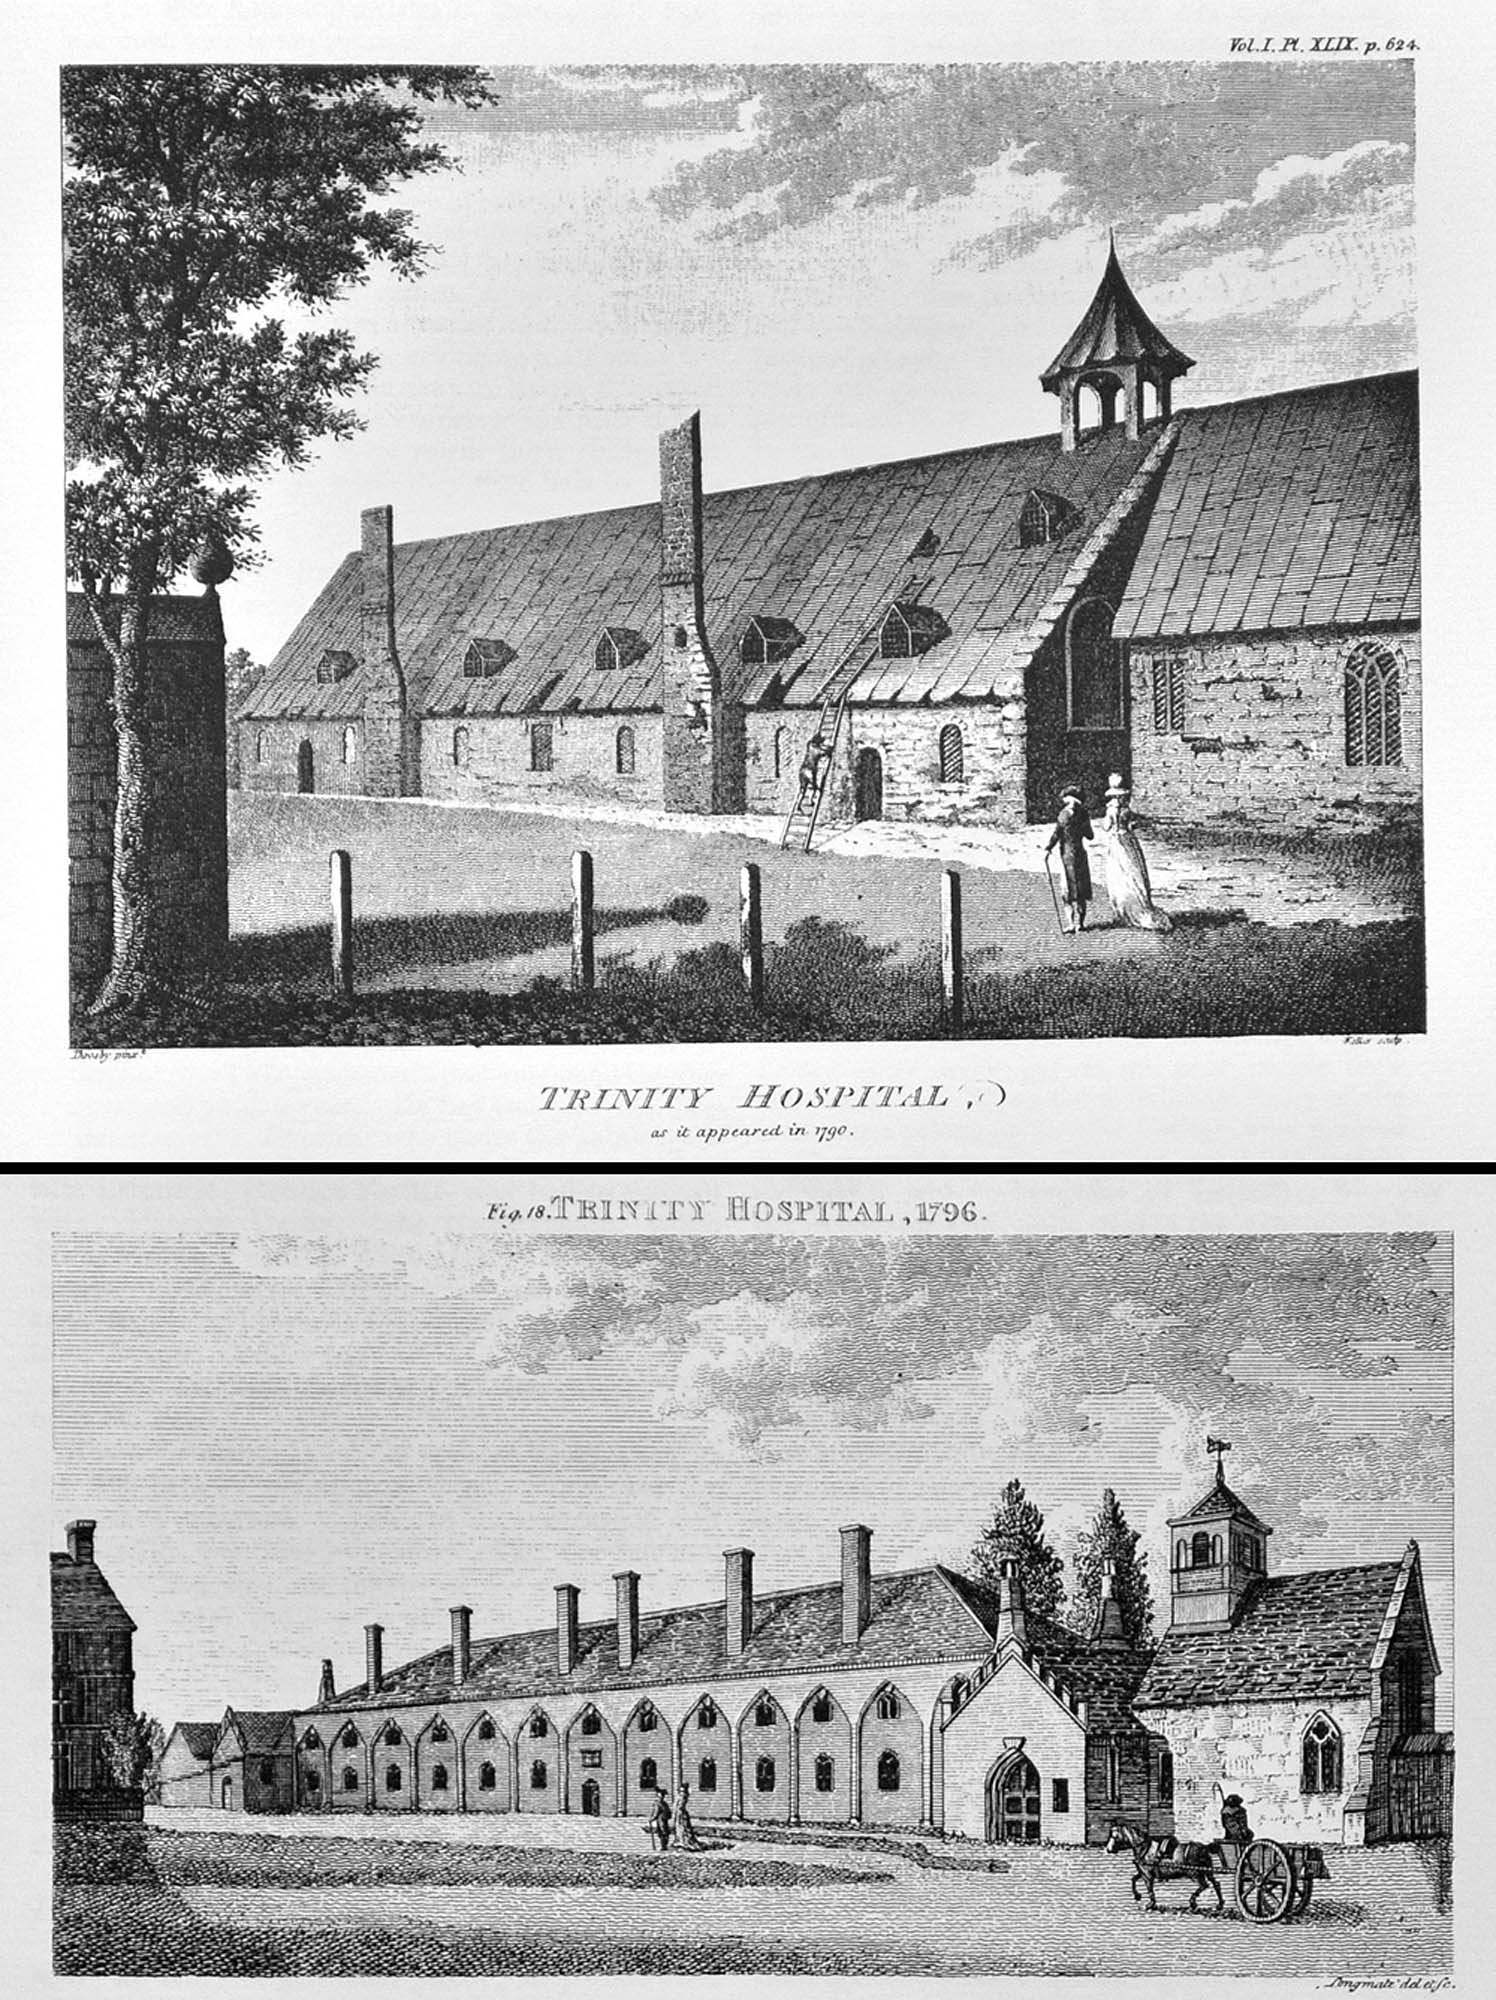 Drawings of Trinity Hospital showing the alterations funded by King George III - 